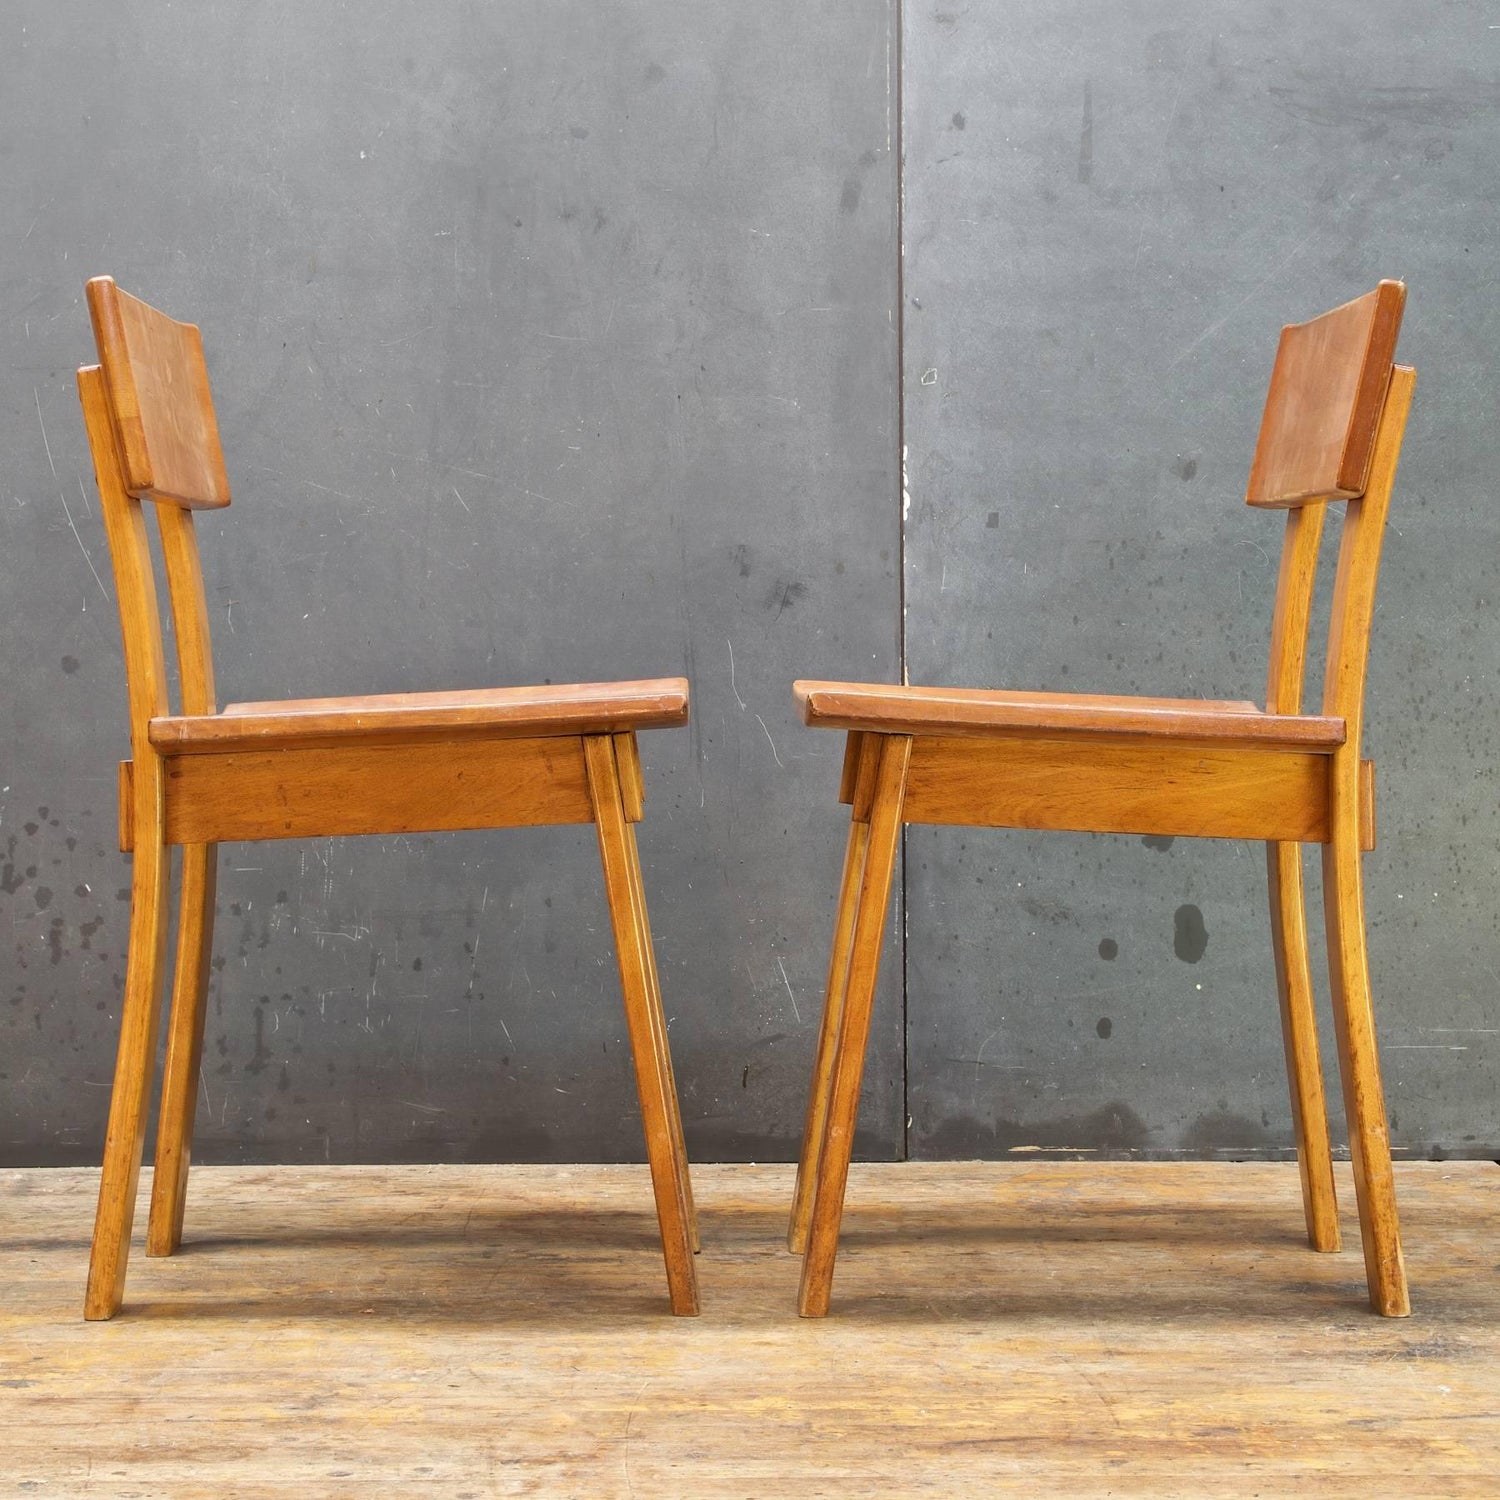 1930s Russel Wright American Modern Furniture Design Chairs